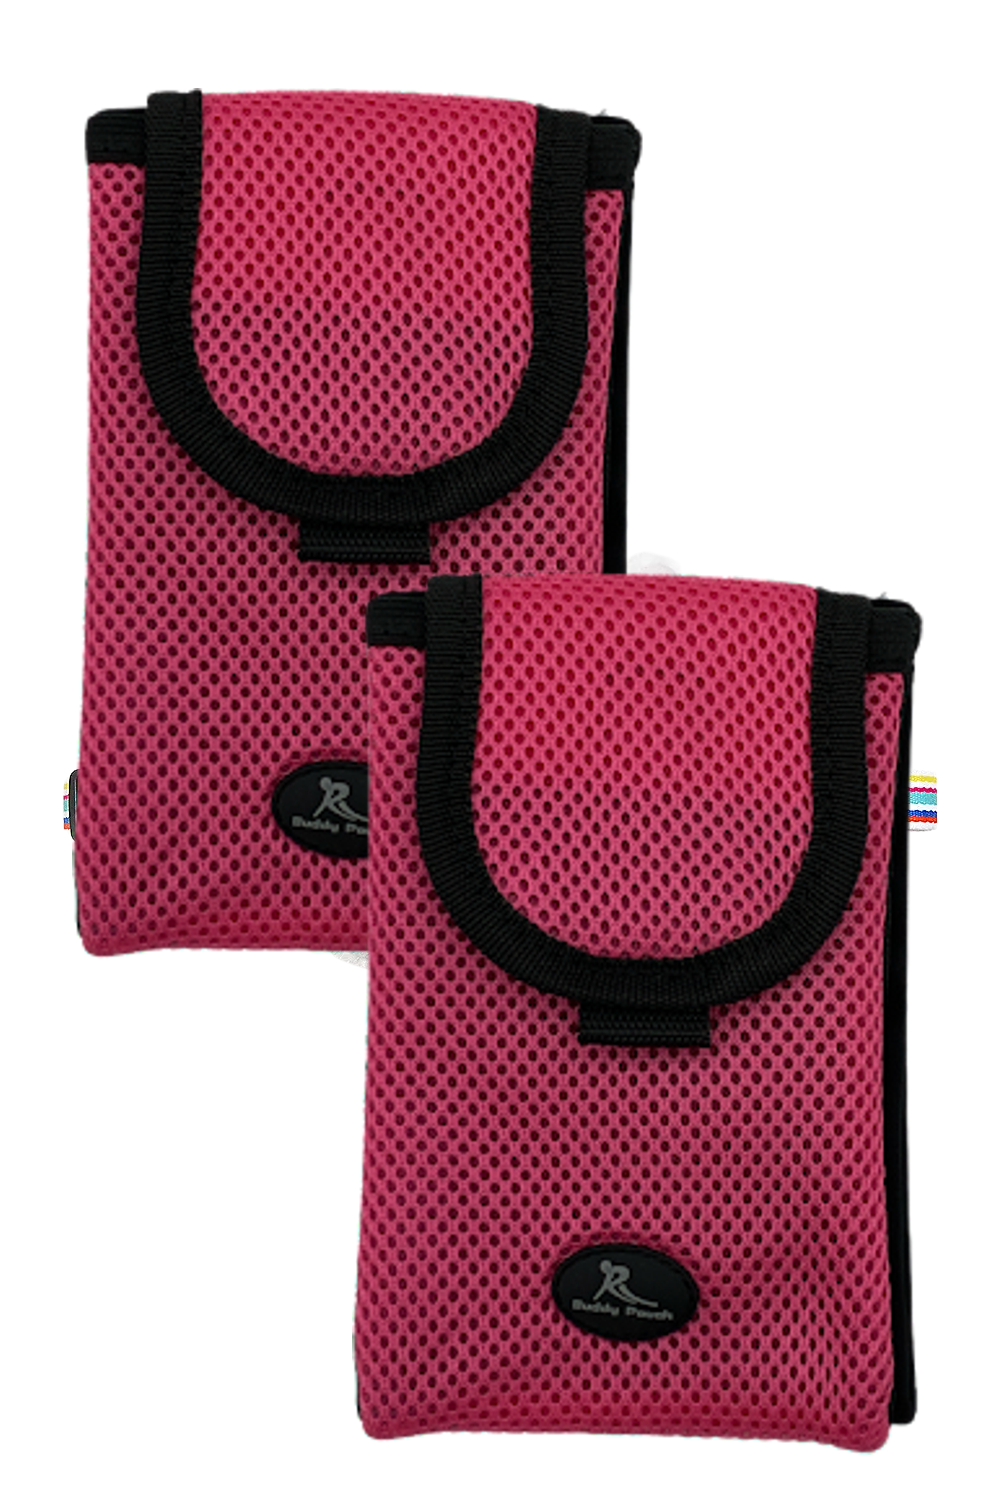 Buddy Pouch On the Go 2-Pack of Belt-Free Mini Plus Pouches Pink